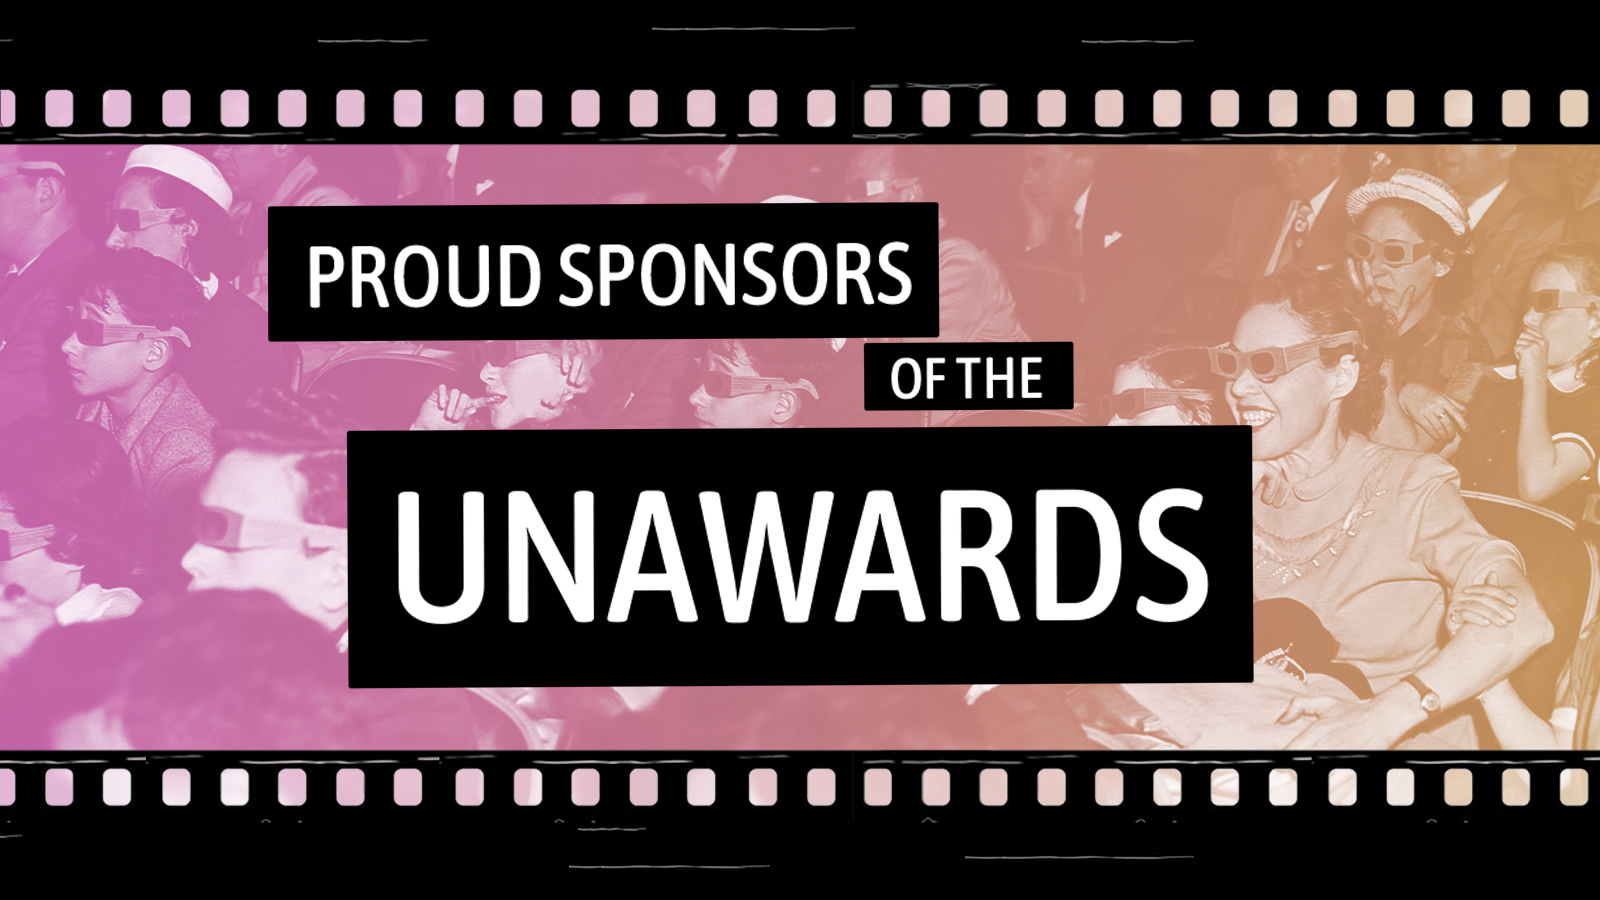 Proud sponsors of 8th annual Unawards